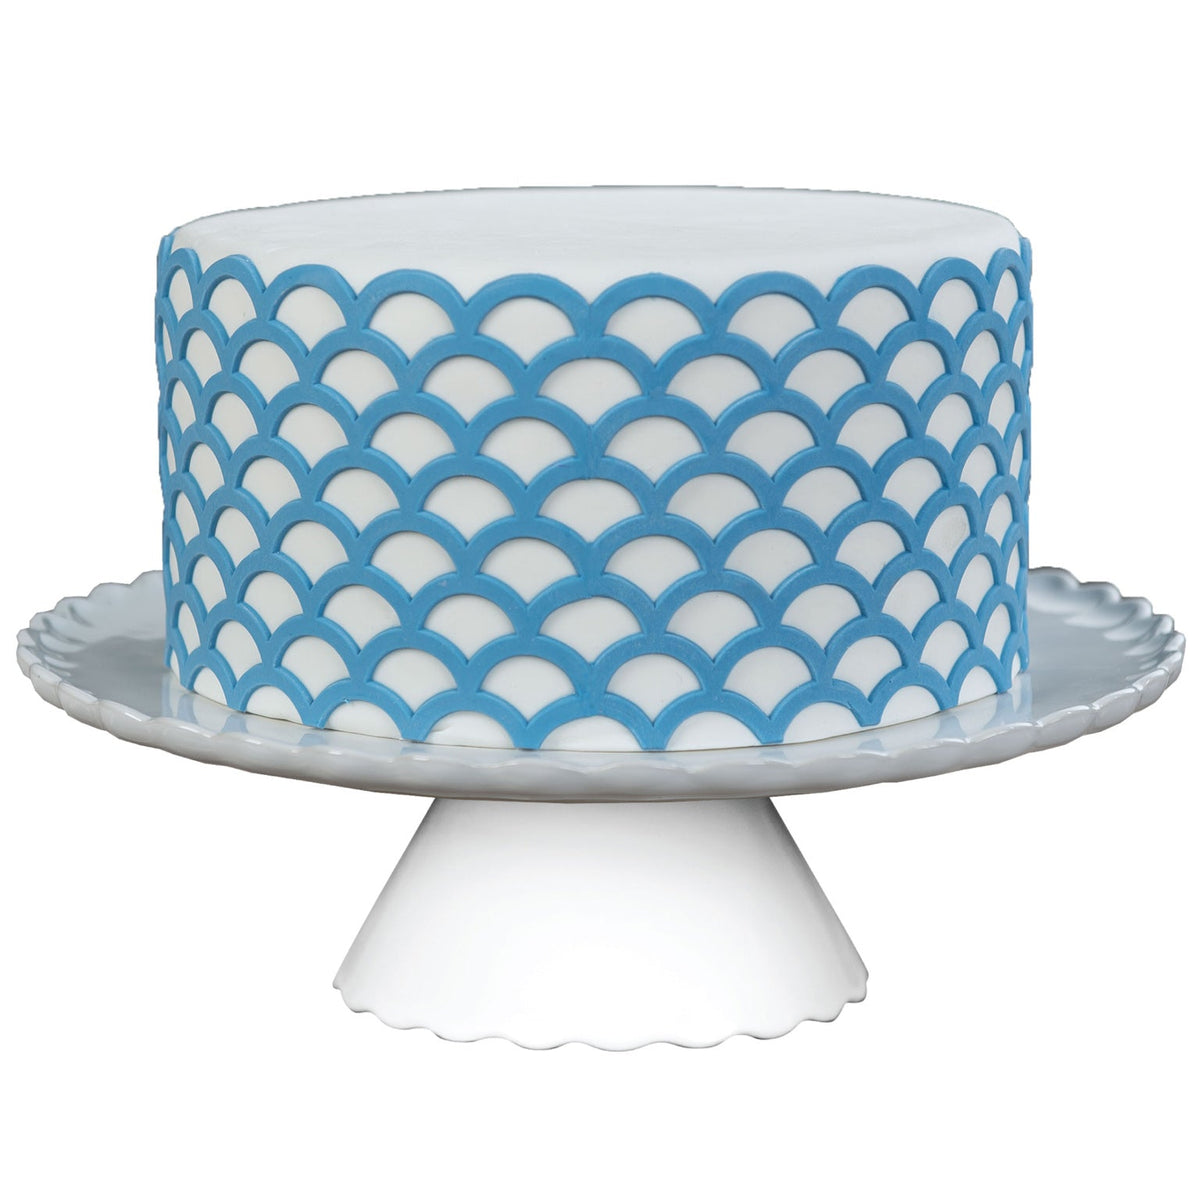 Marvelous Molds Clever Chevron Silicone Onlay Cake Supplies